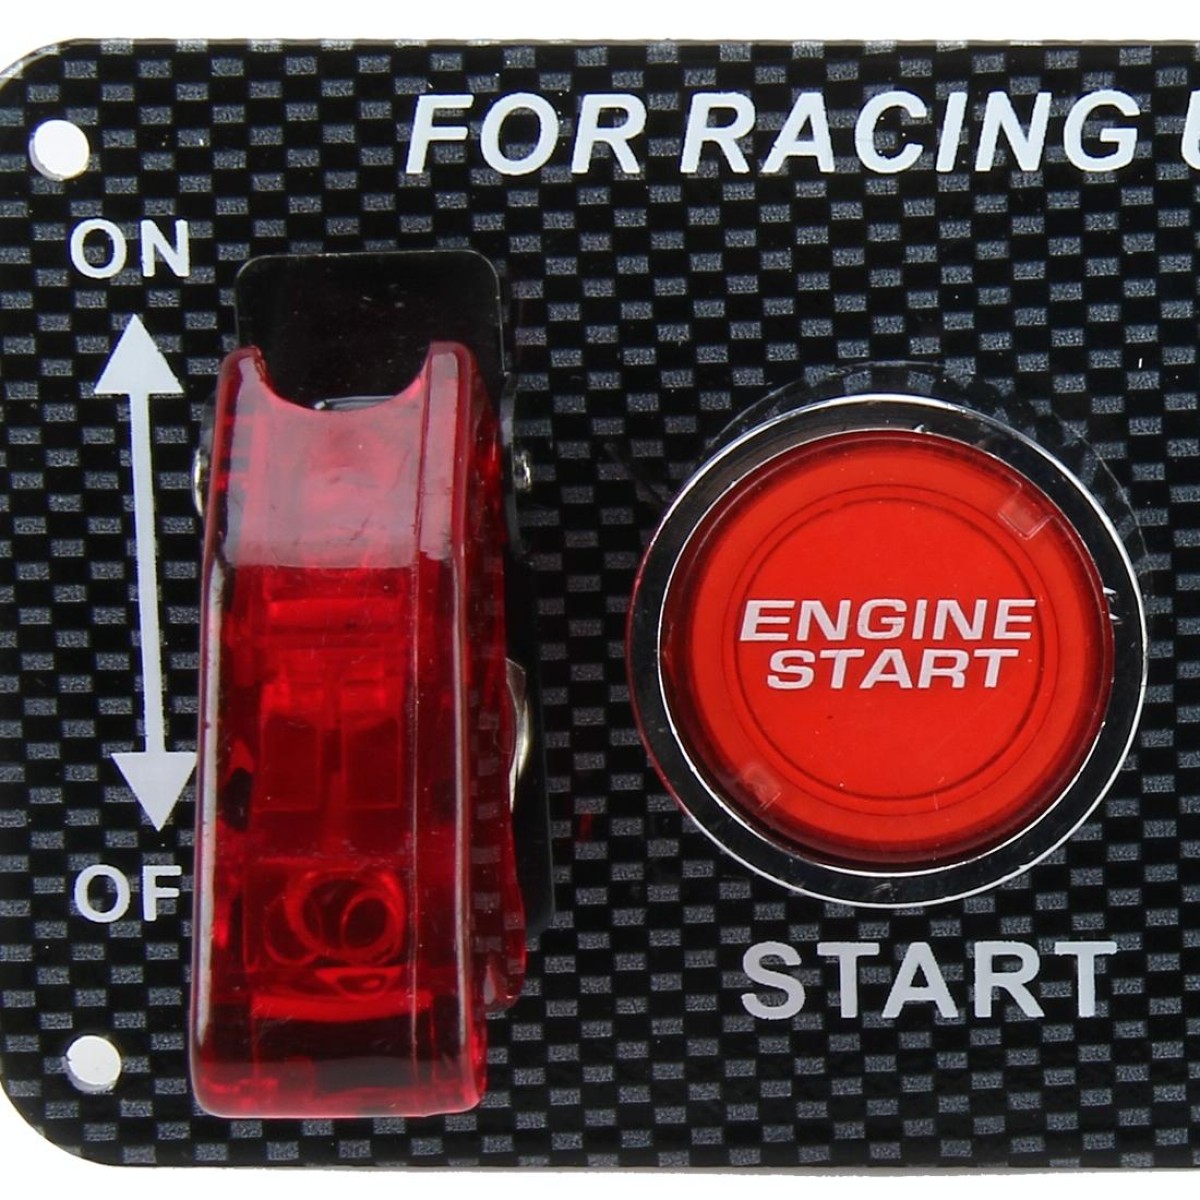 12V / 30A Carbon Fiber Racing Car 12V LED Ignition Switch Panel Engine Start Push Button LED Car Panel Switches Lever Multi-function Automatic Ignition Switch for Racing Cars